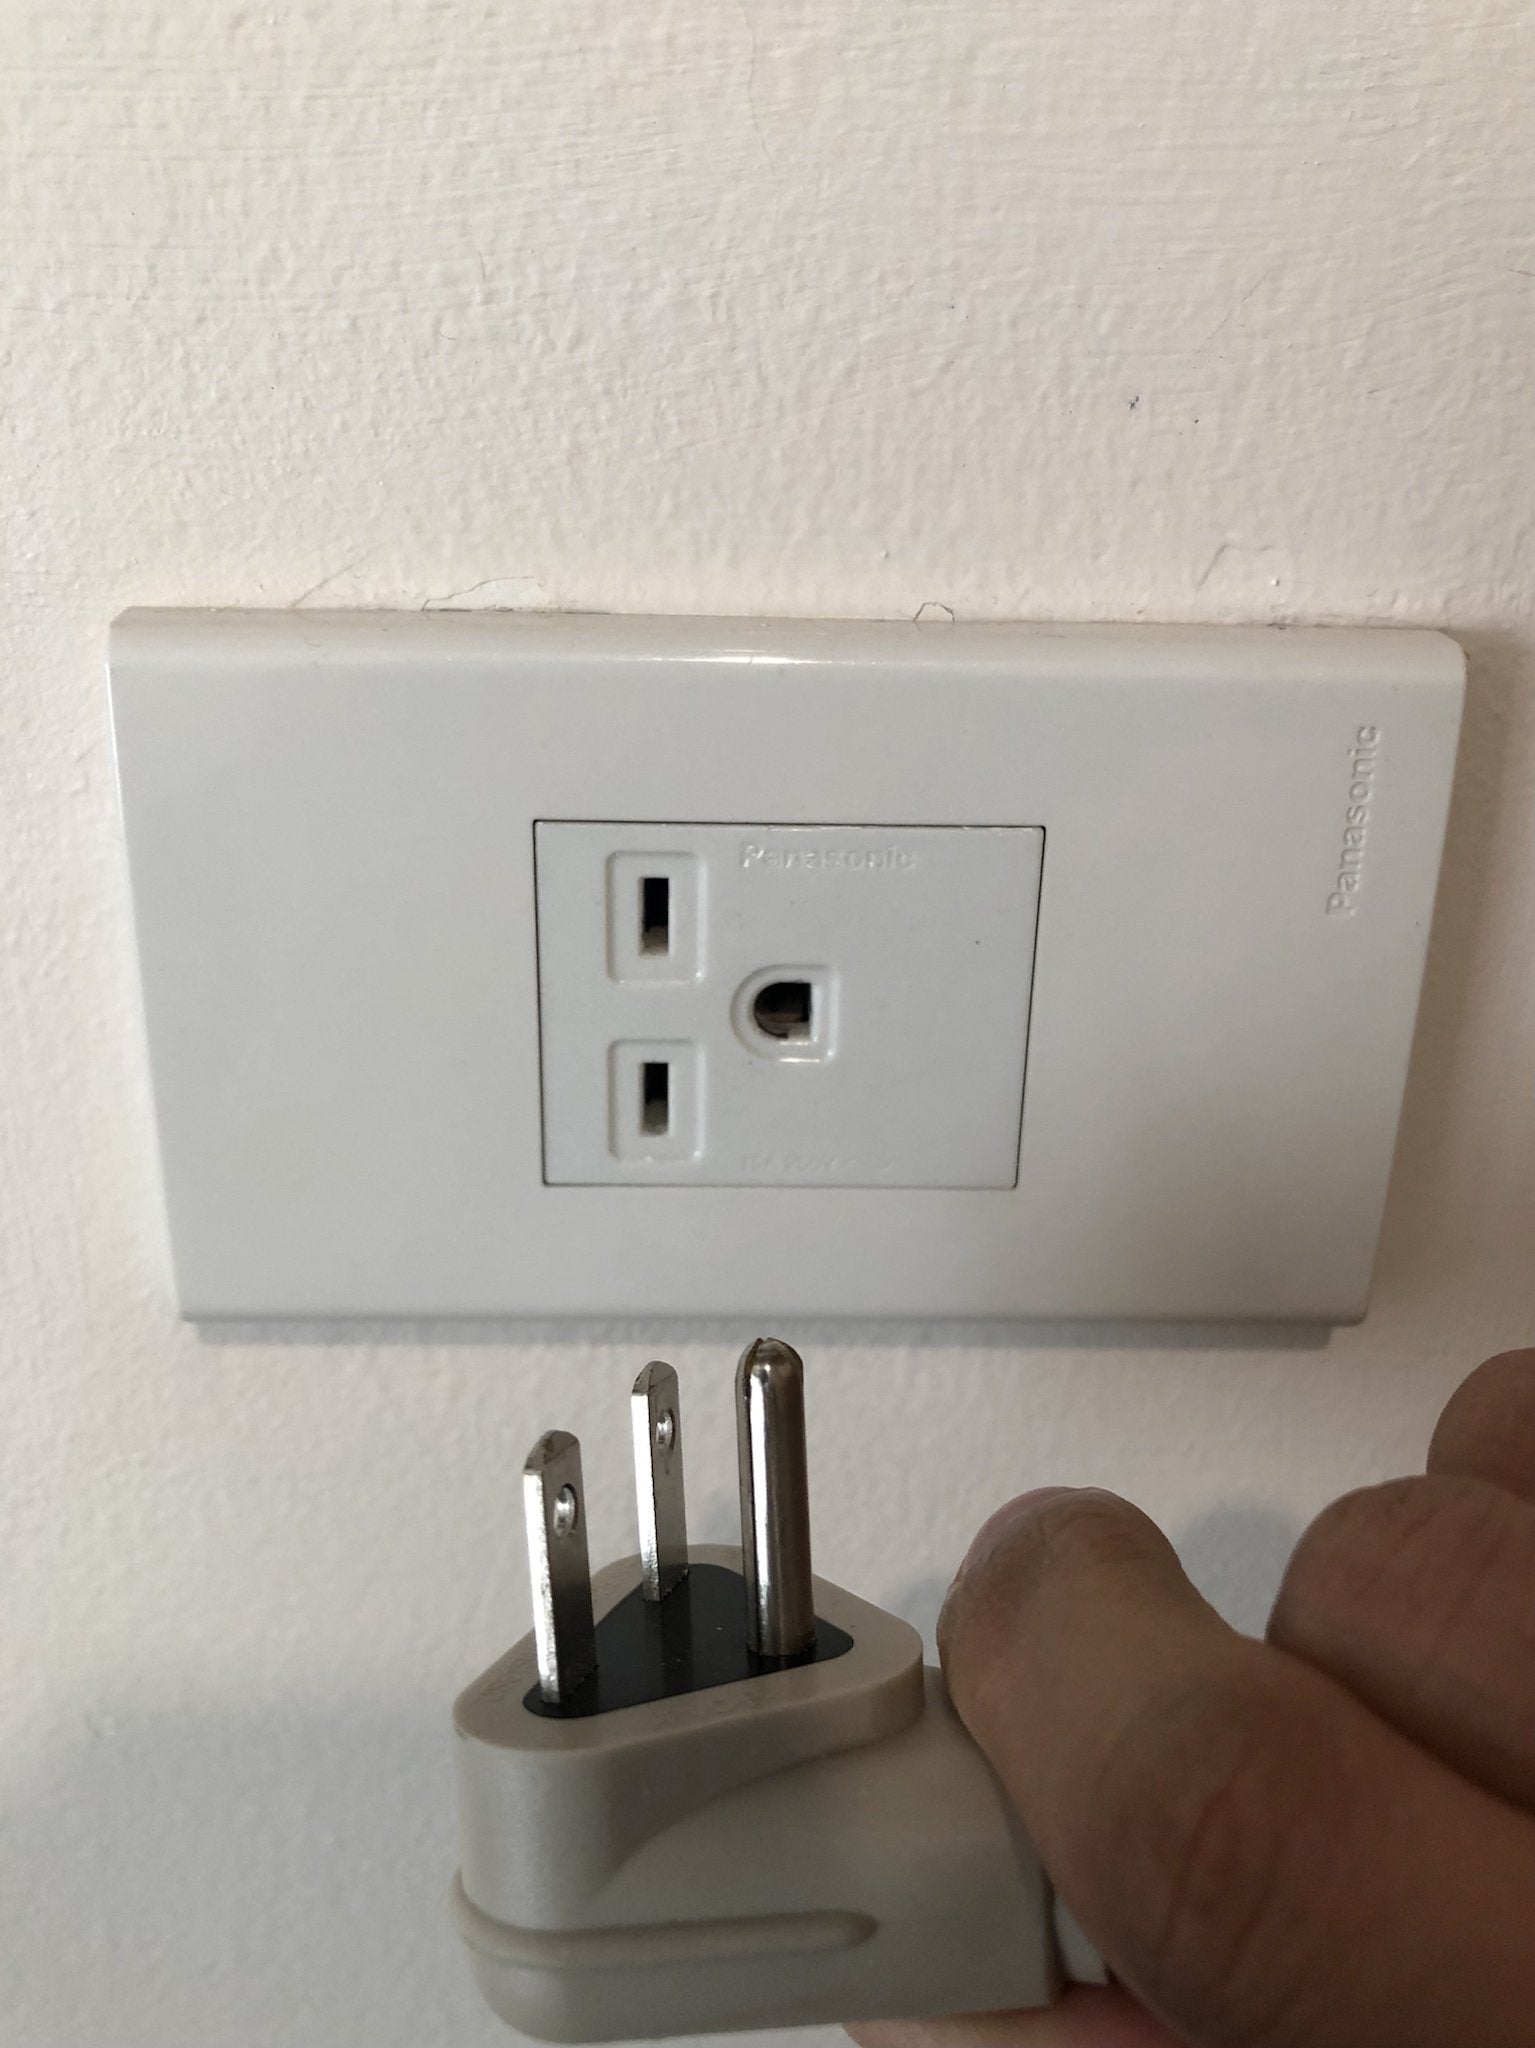 Do you have any Homekit Smartplugs for this